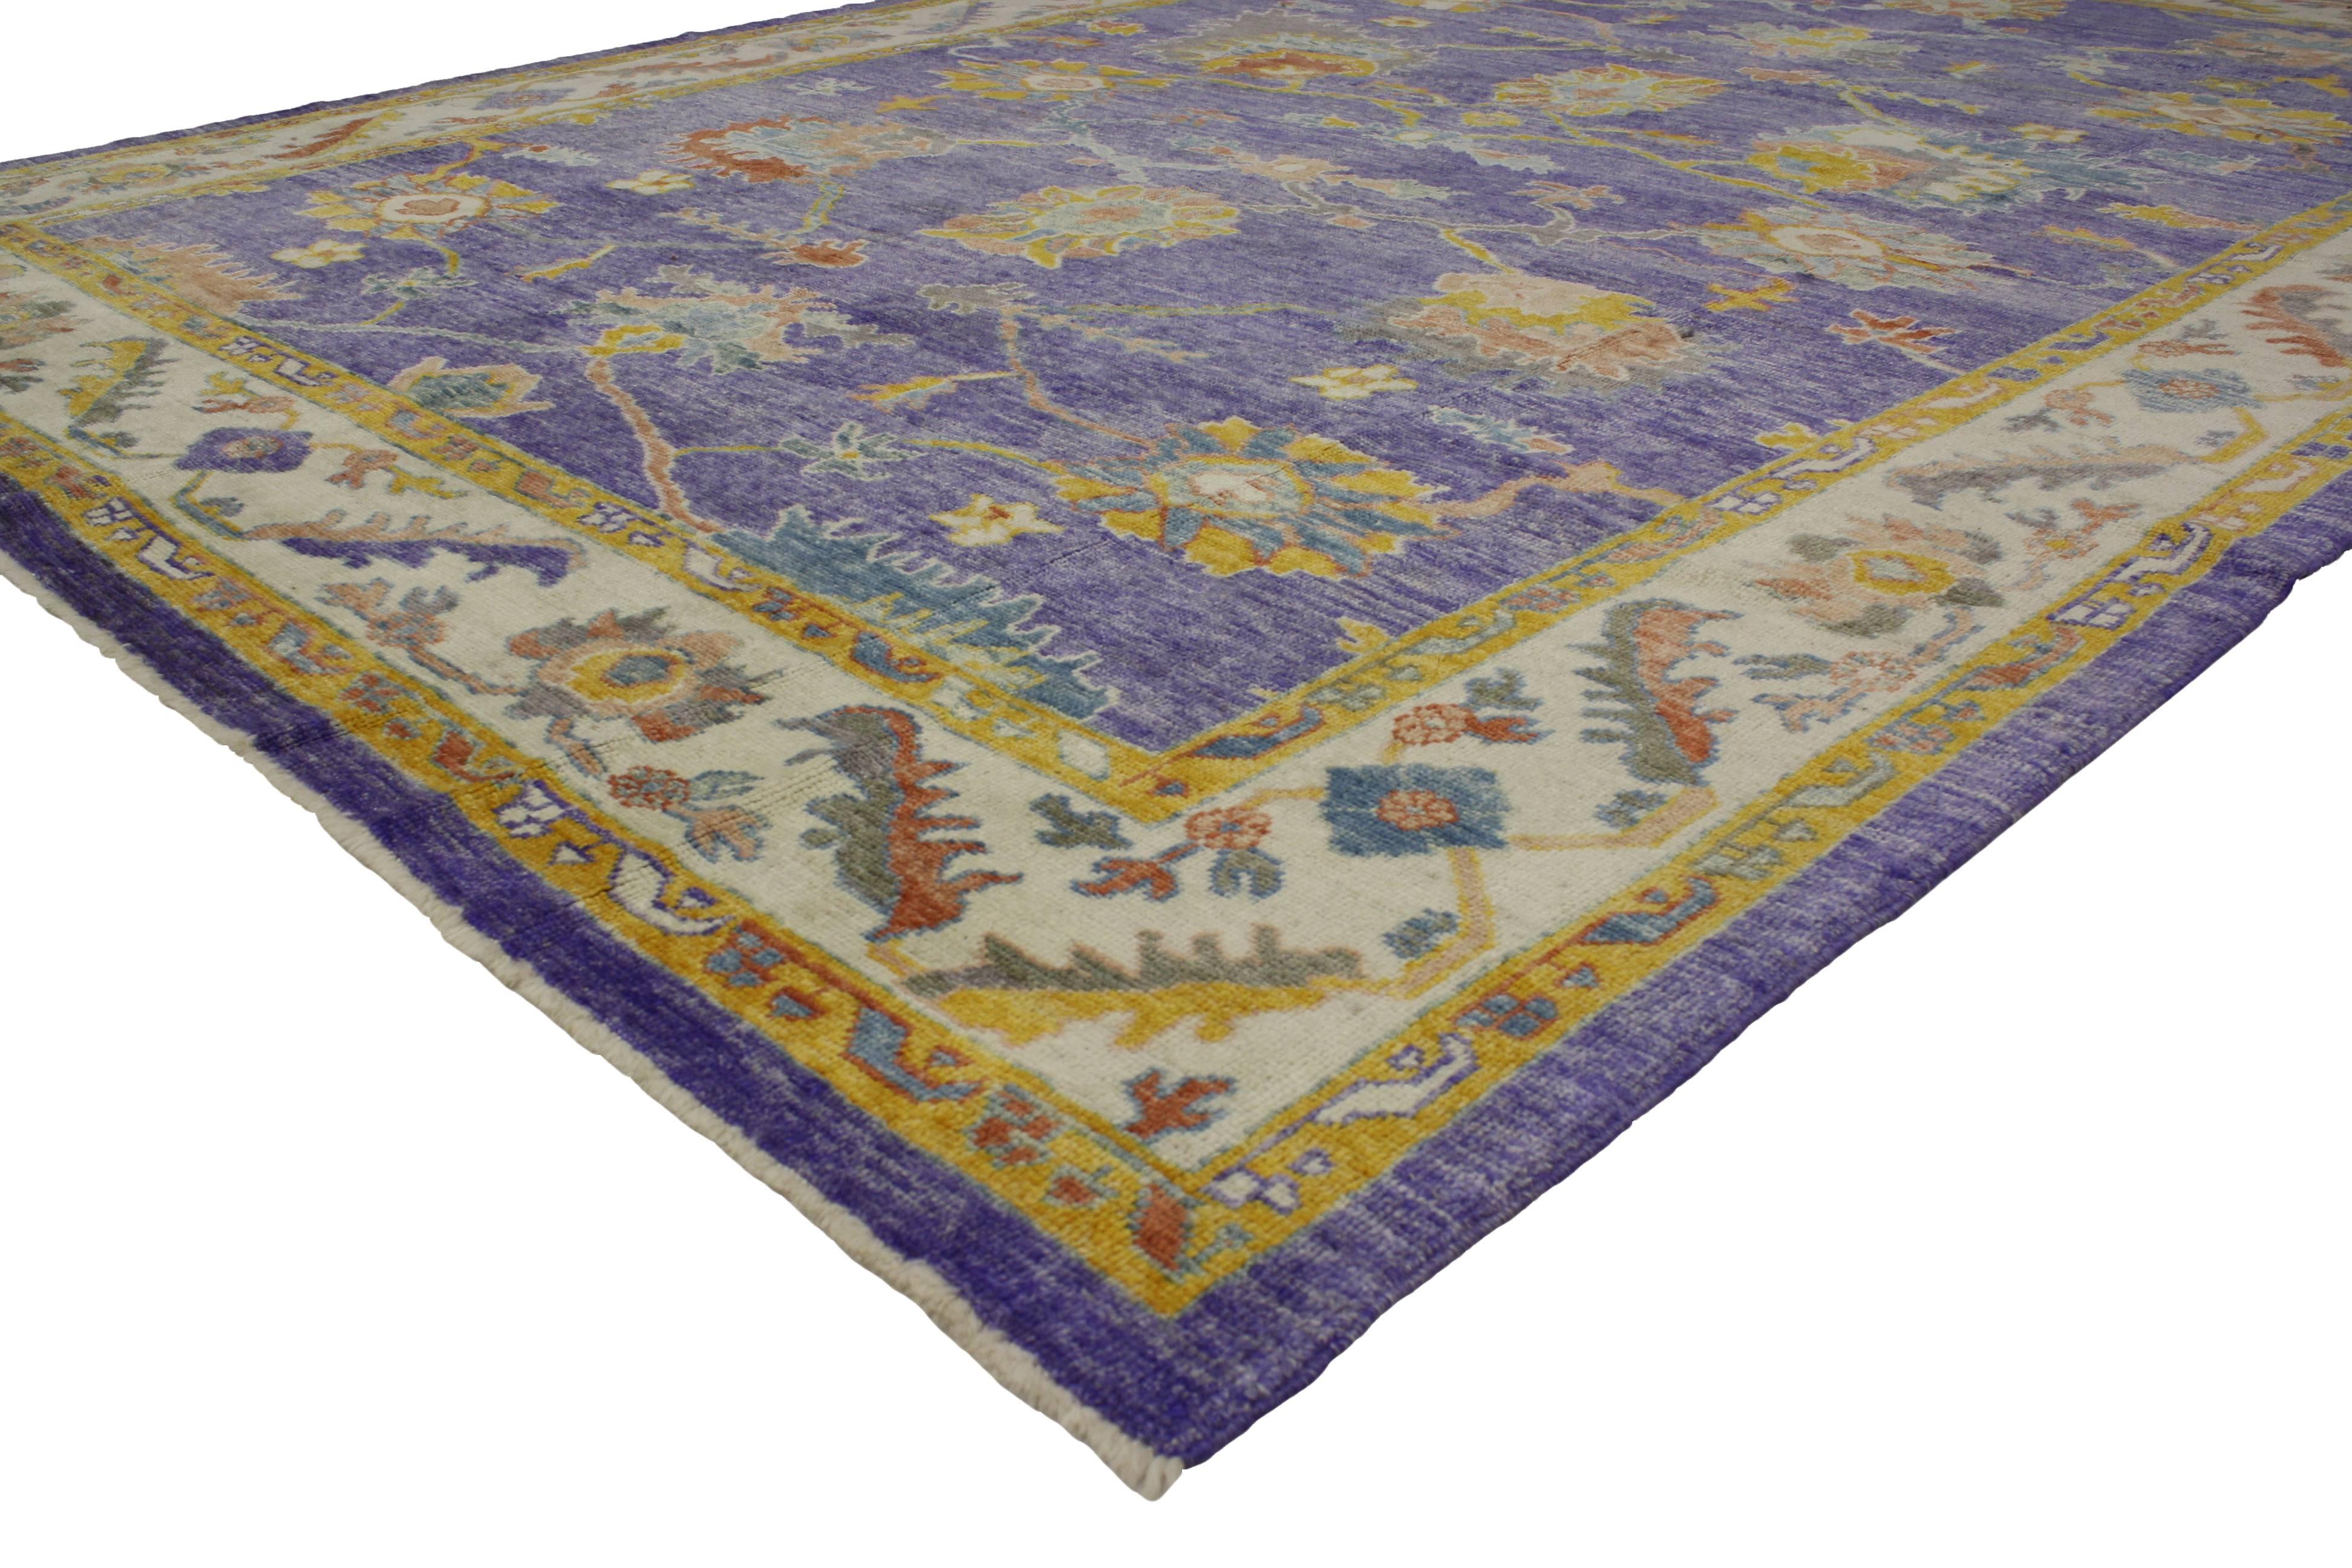 51887 Contemporary Turkish Oushak Purple Area Rug with Modern Style and Memphis Design. Give your home fashion-forward energy with the dynamic and dramatic look of a purple Oushak rug. This contemporary Turkish Oushak rug bears a remarkable air of